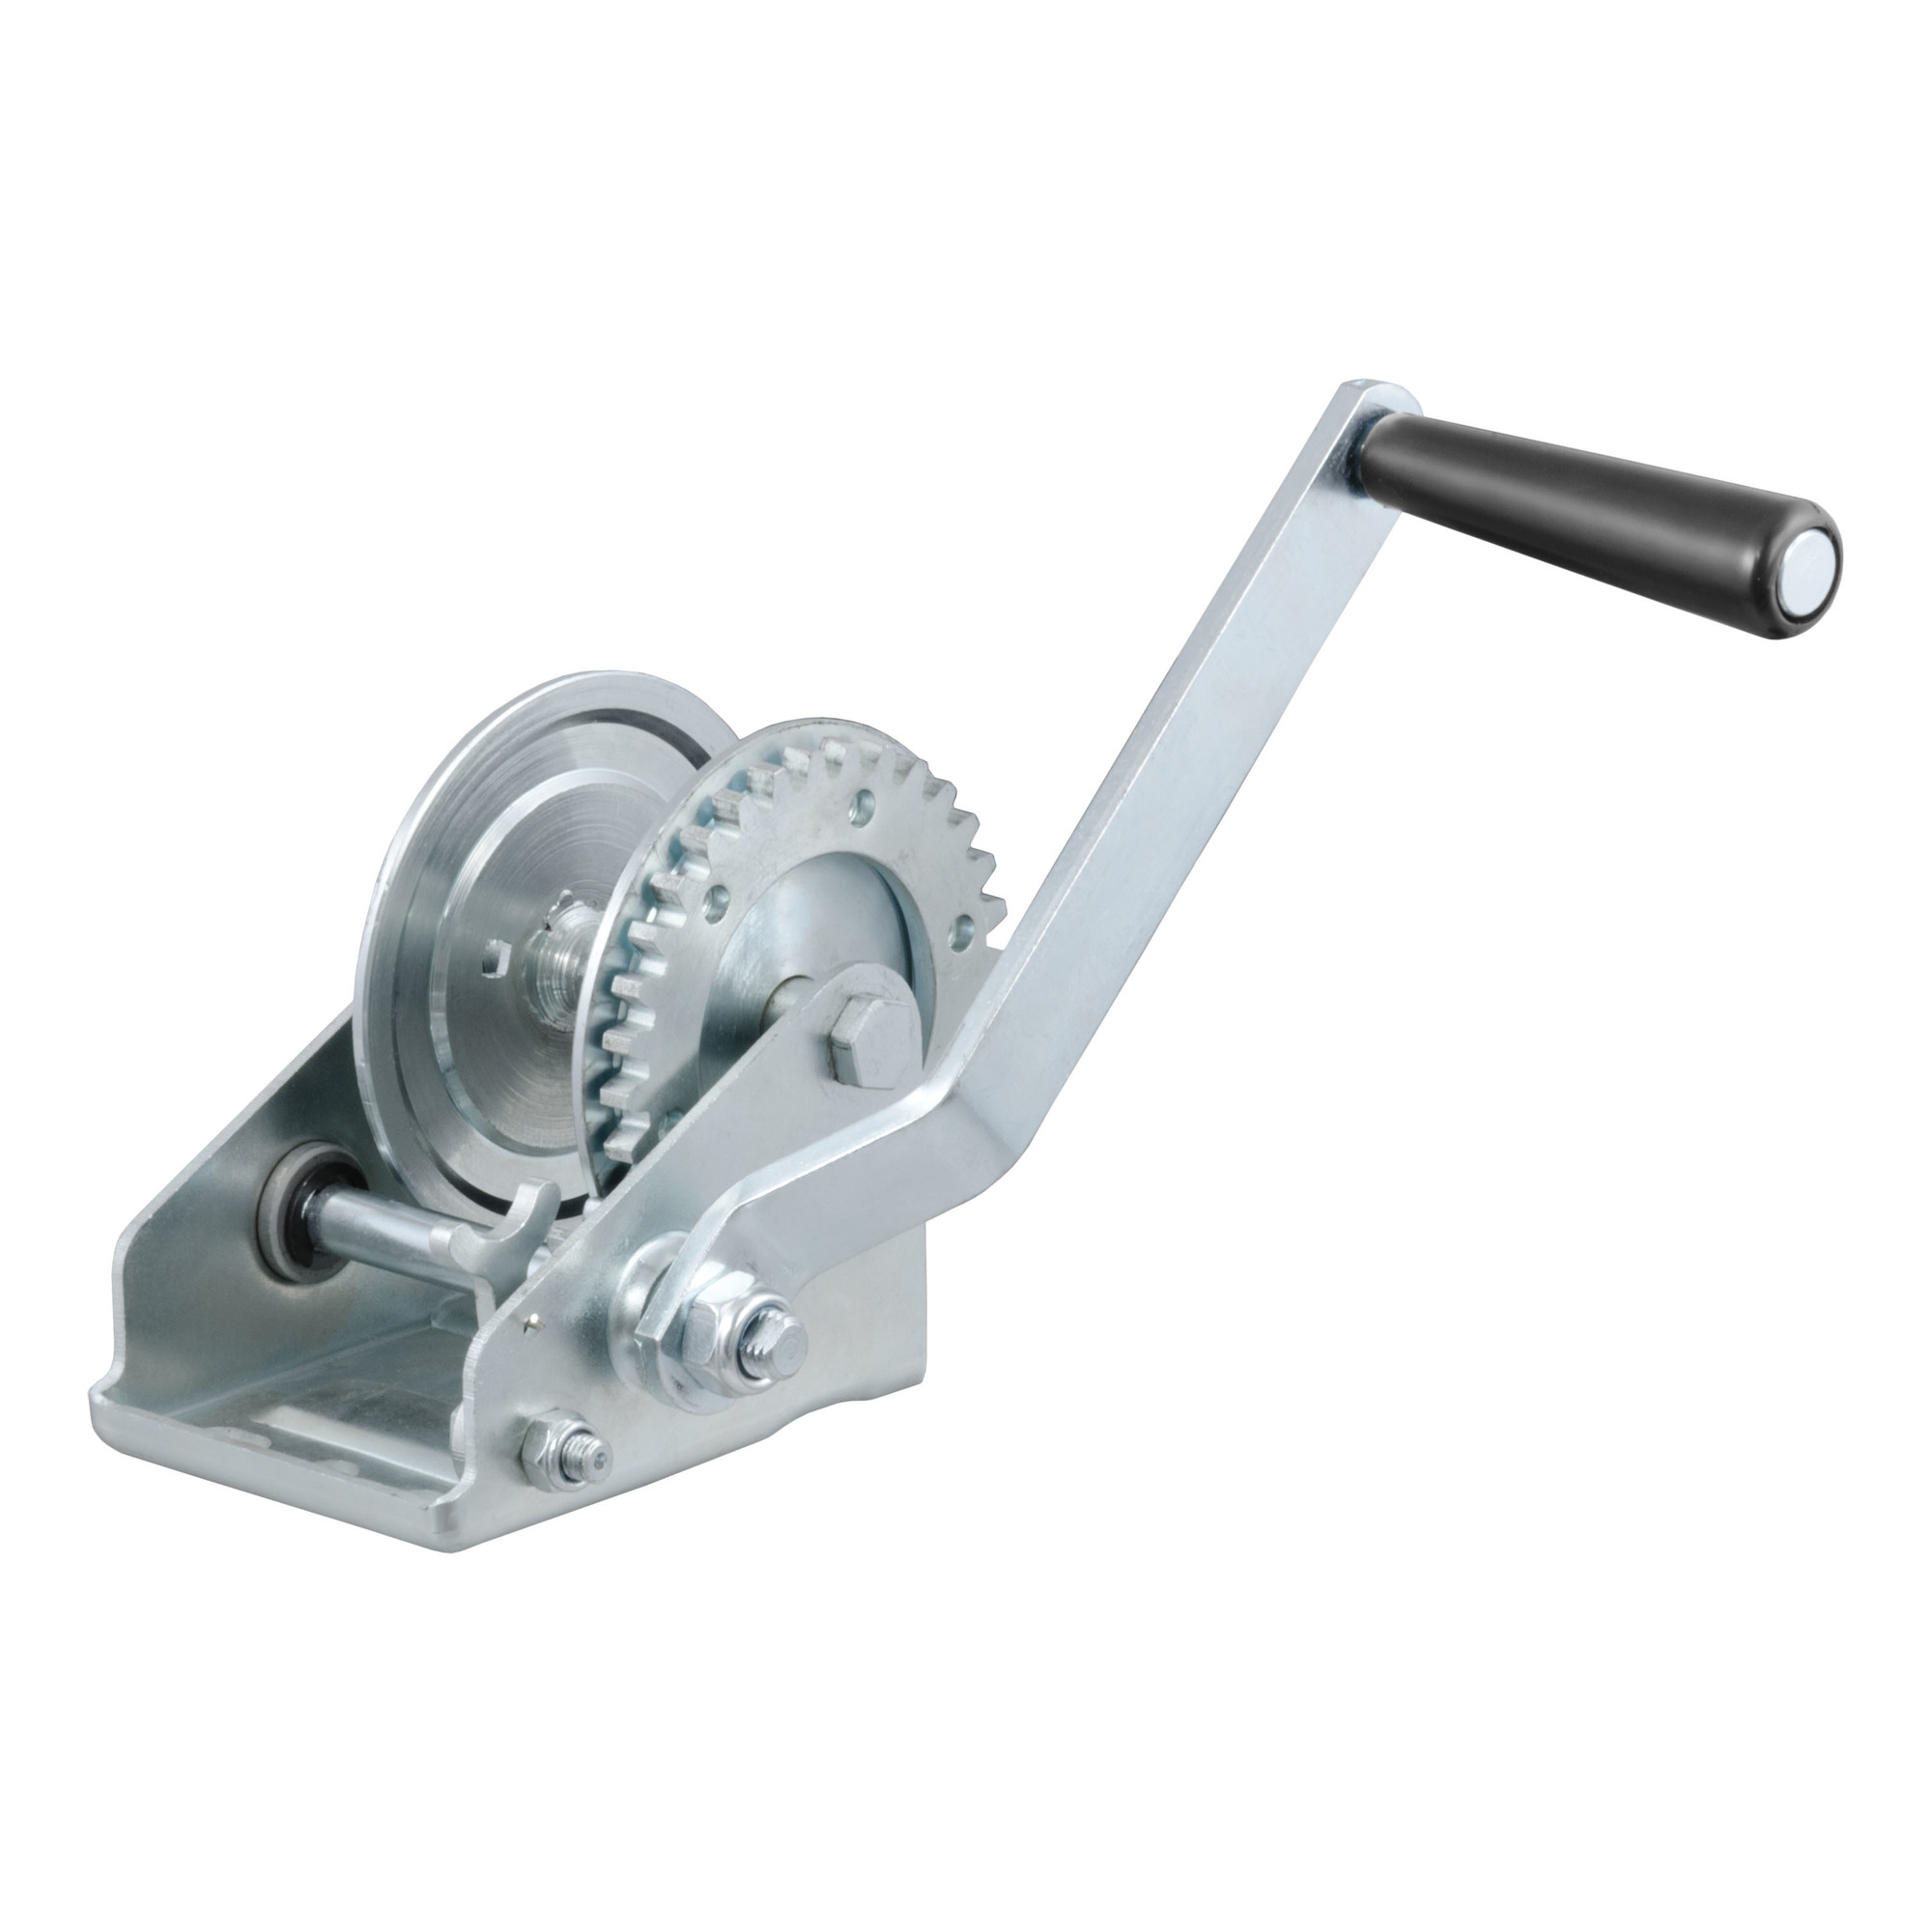 Curt Manufacturing, Hand Crank Winch (900 lbs, 6-1/2Inch Handle), Model 29423